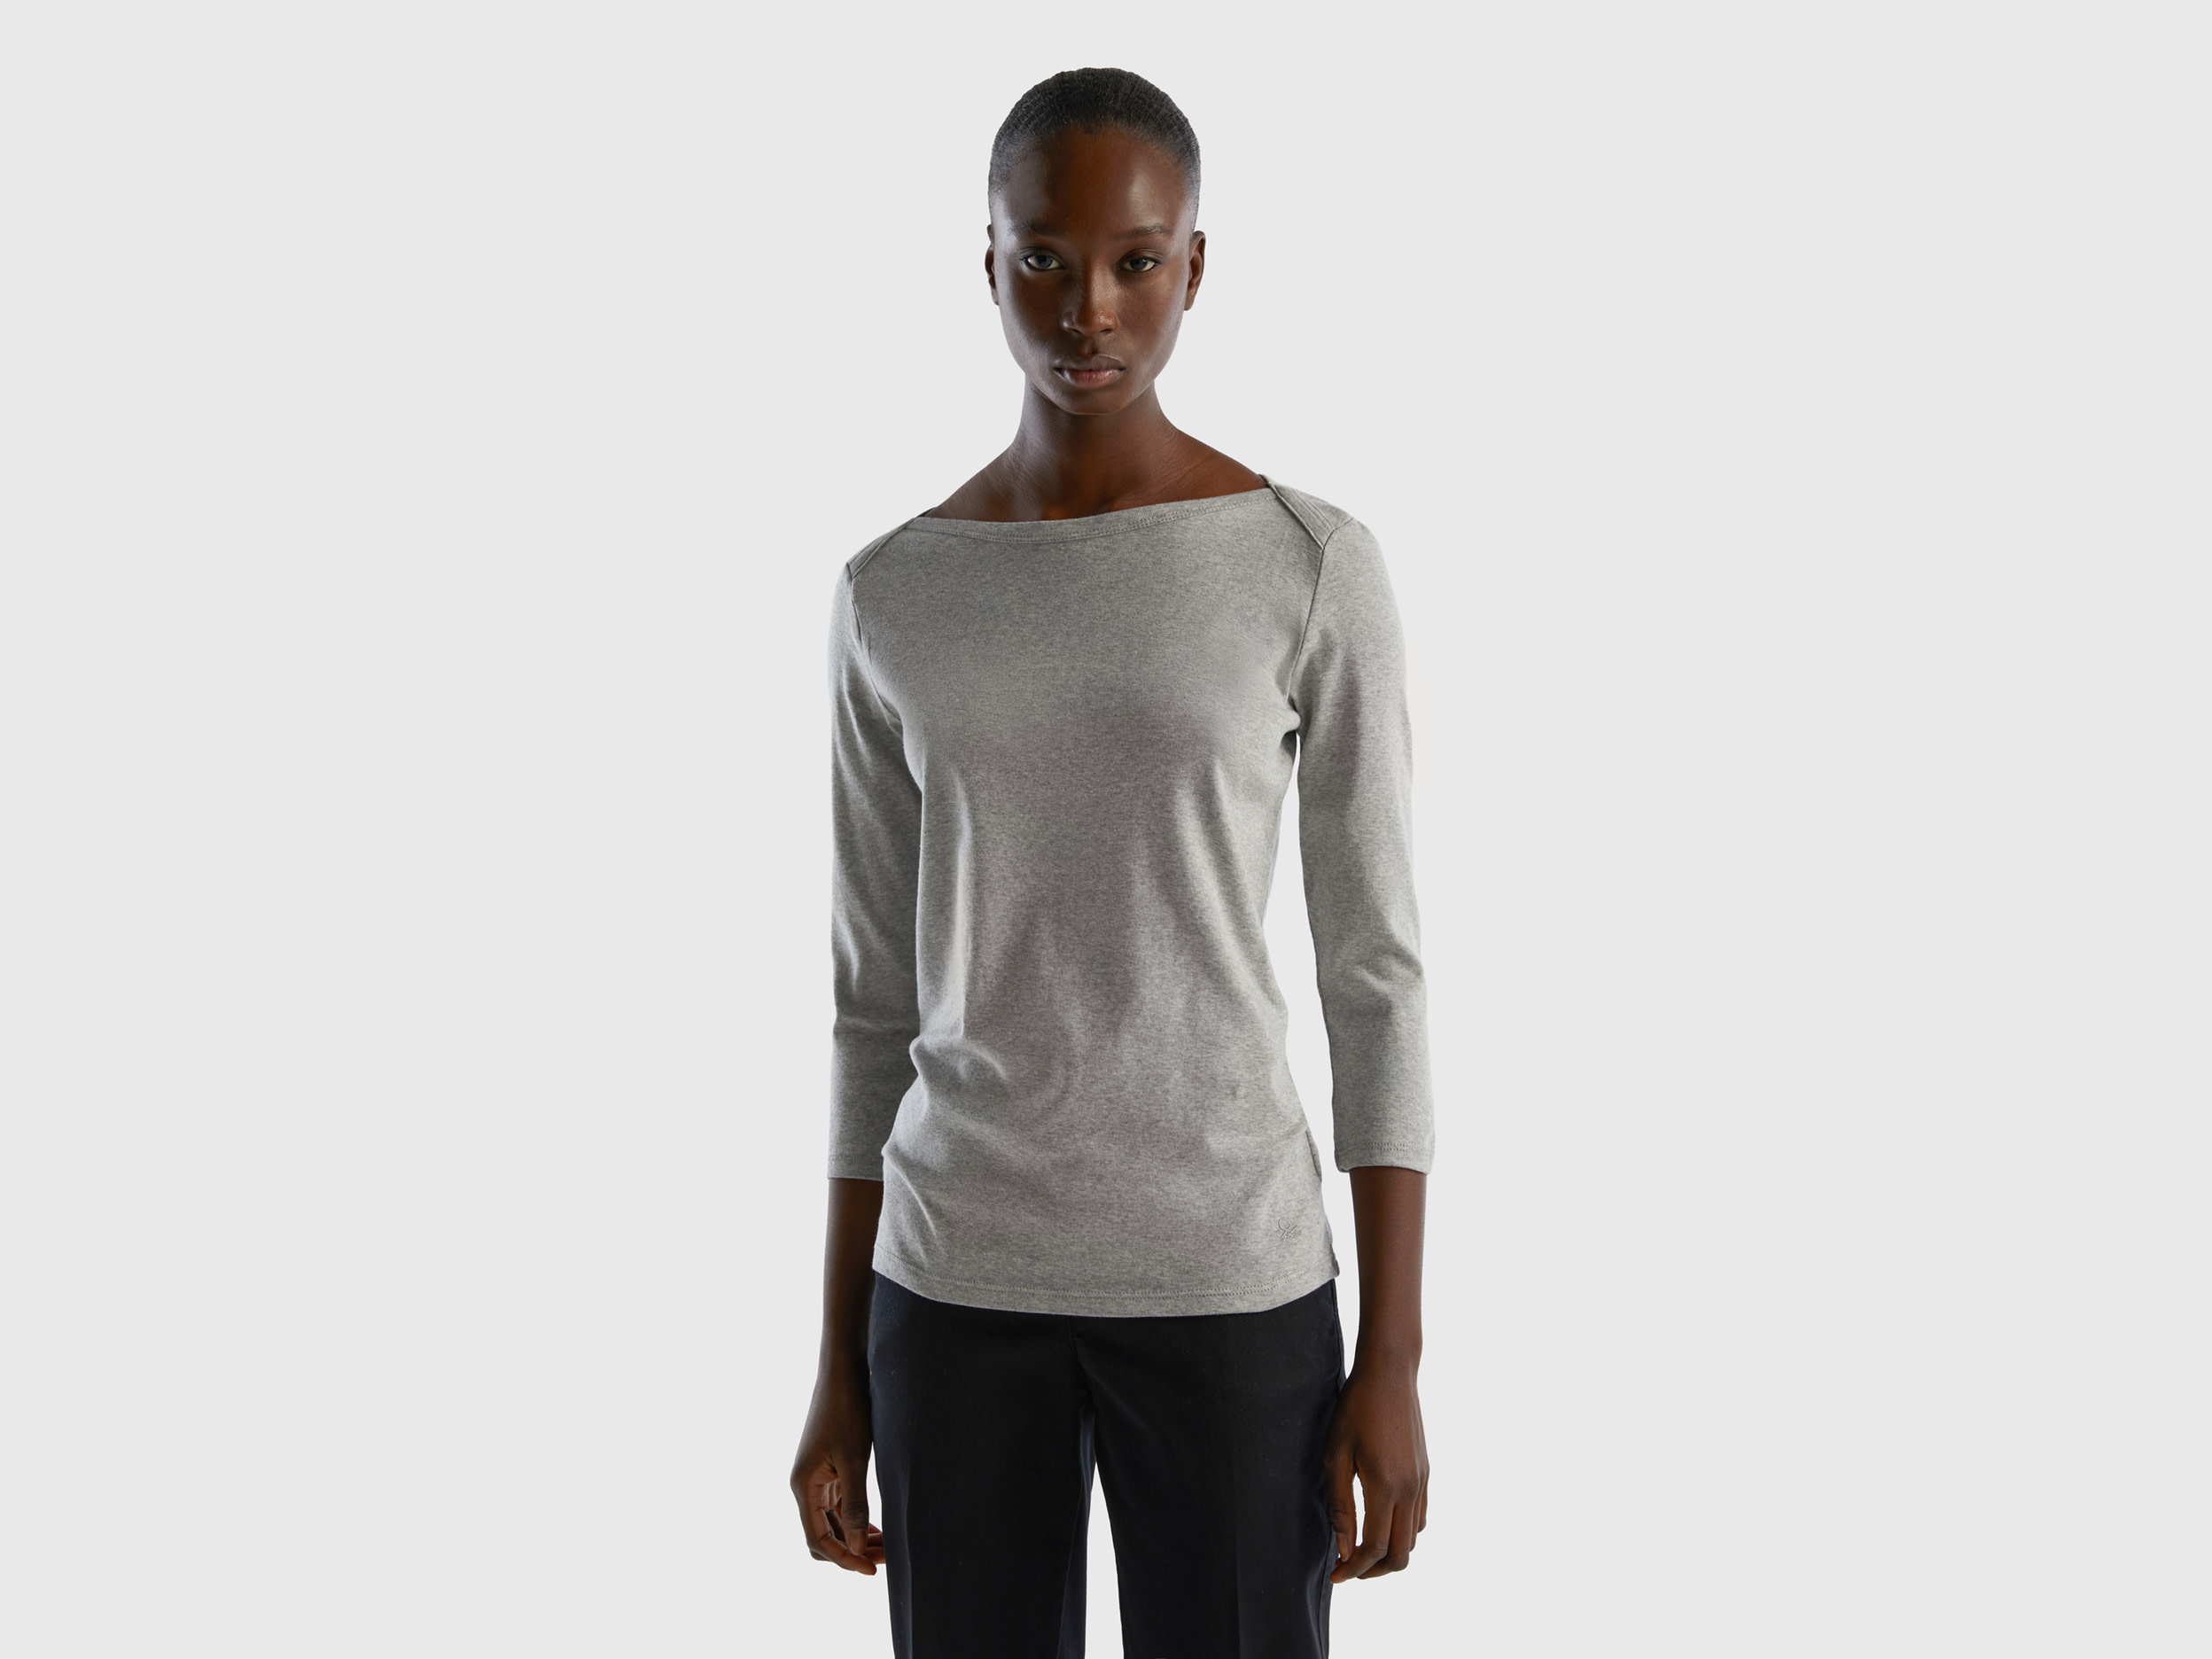 Benetton, T-shirt With Boat Neck In 100% Cotton, size L, Light Gray, Women